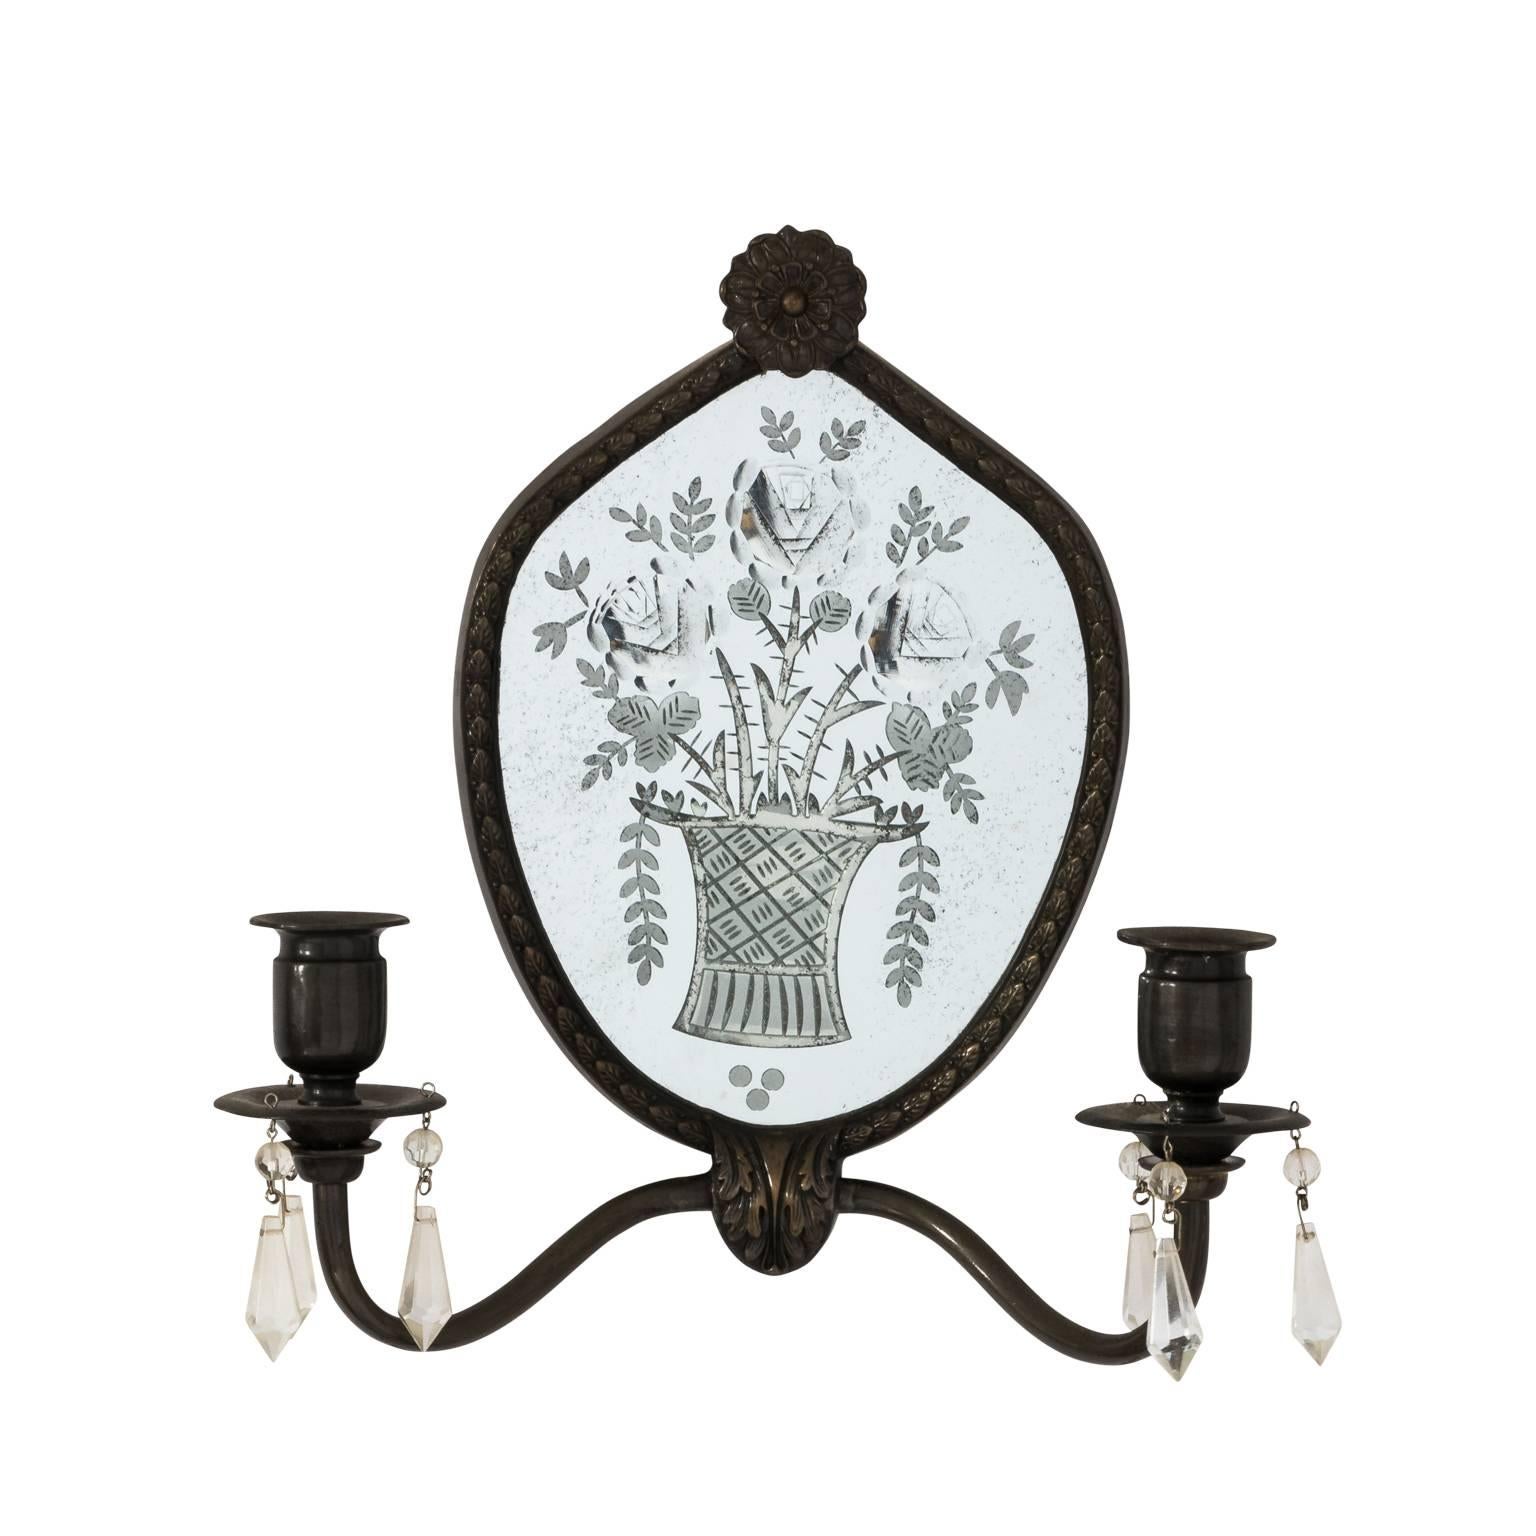 Pair of etched mirrored back candle sconces with crystal drops and two arms, circa early 20th century.
 